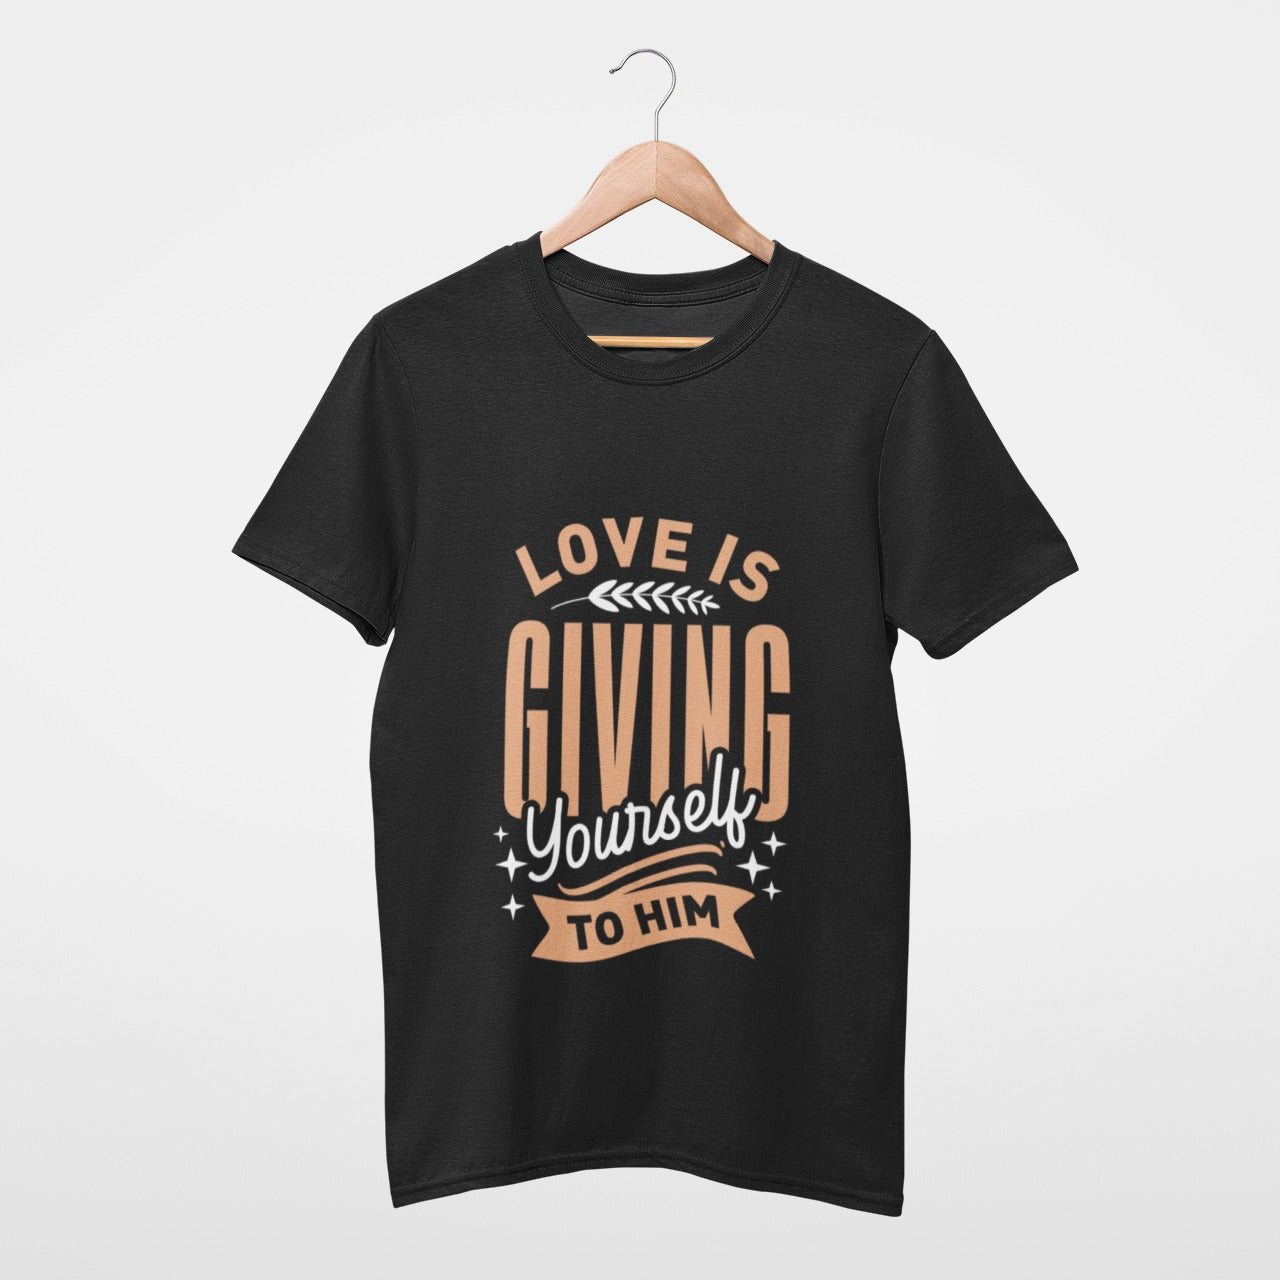 Love is giving yourself to him Tee